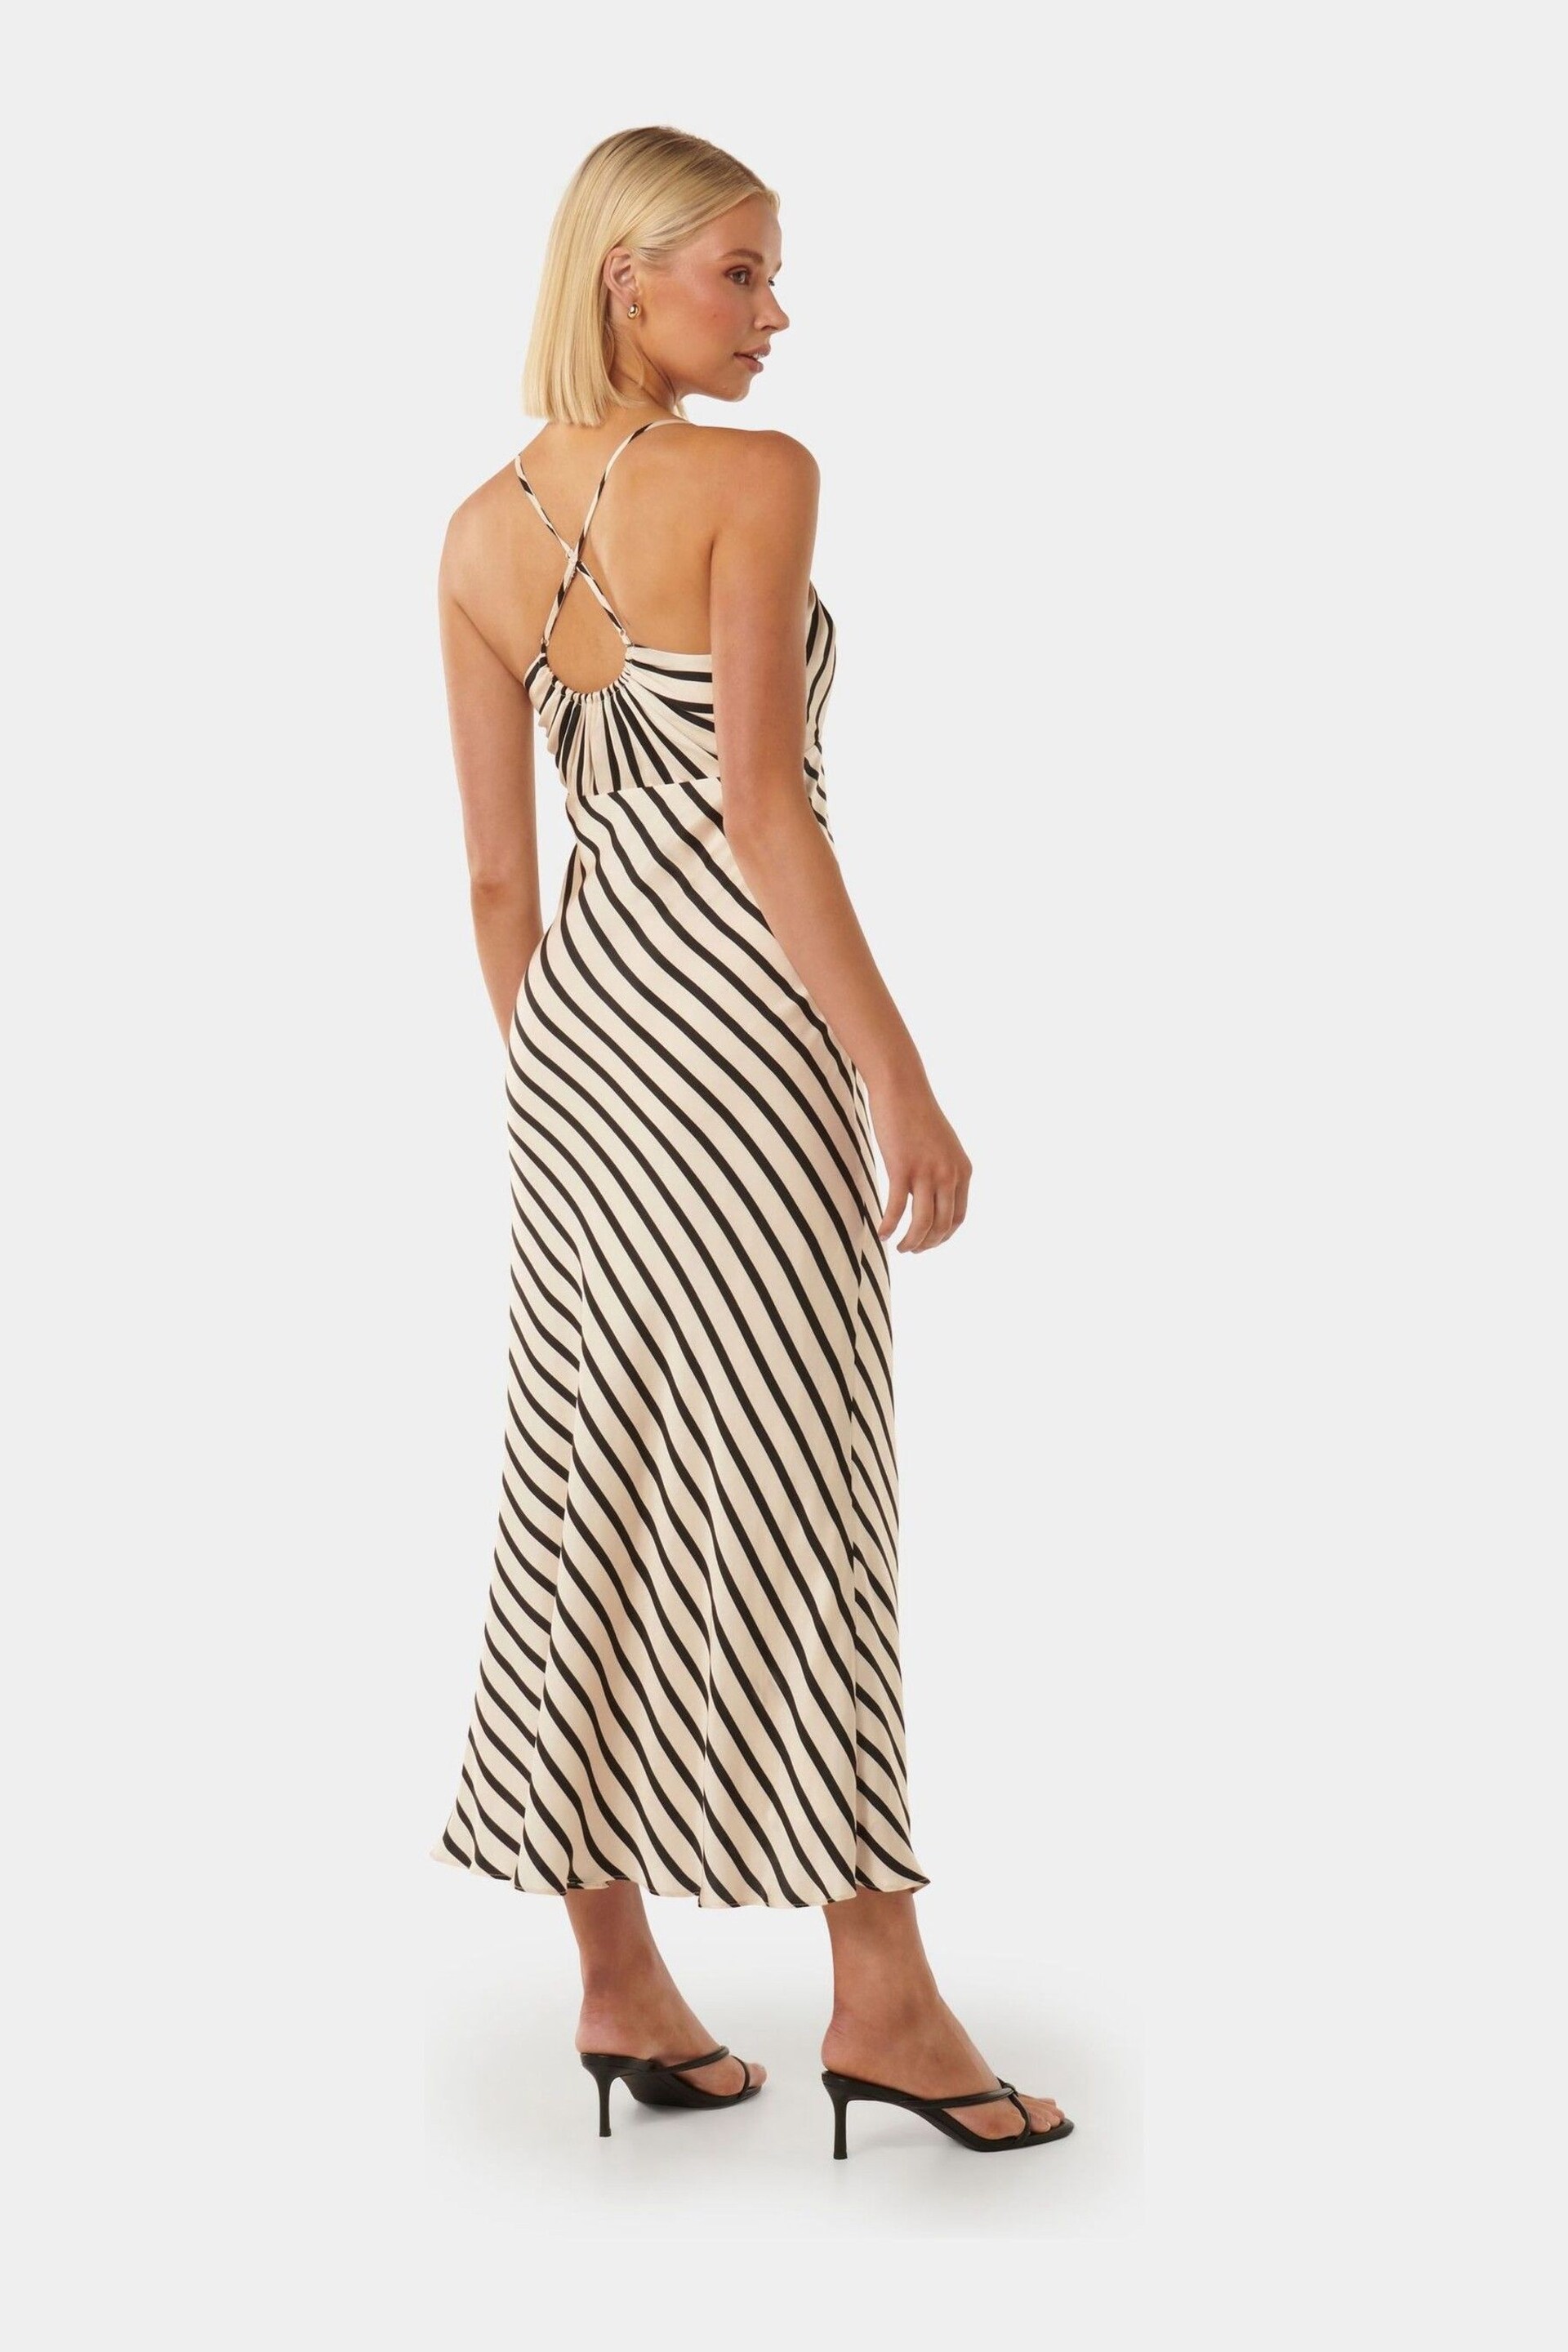 Forever New Nude Abby Satin Striped Midi Dress - Image 4 of 4